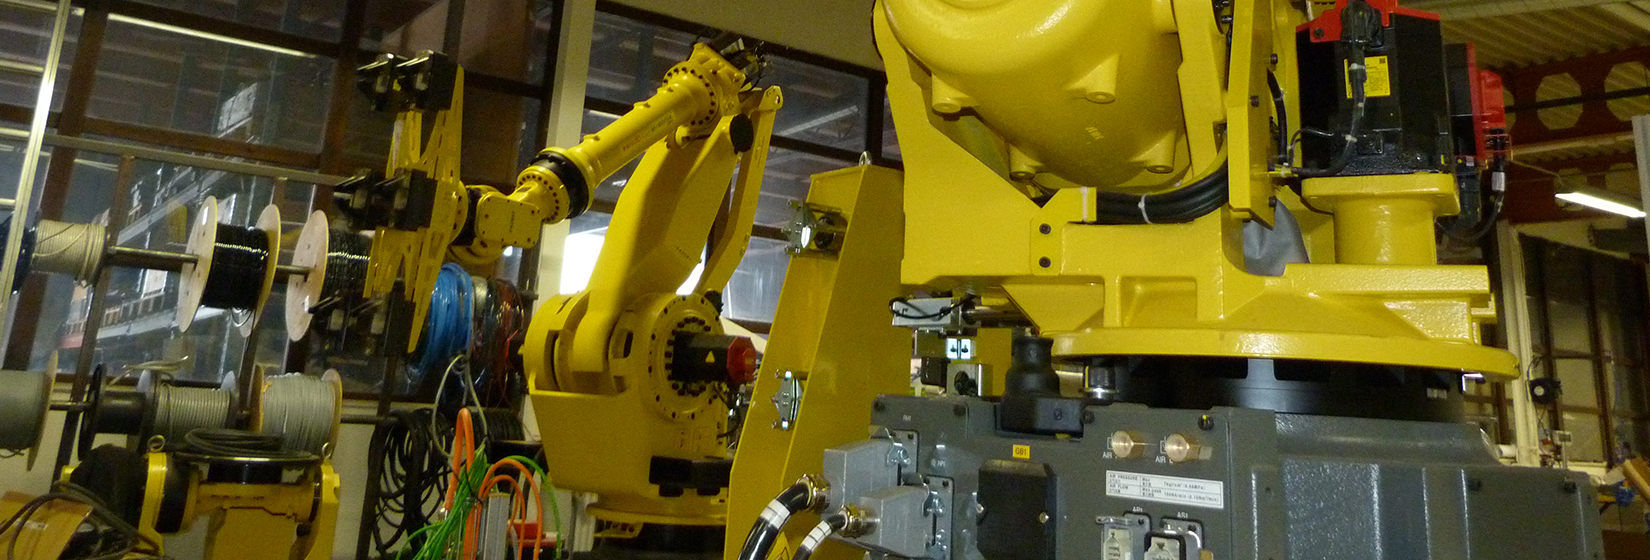 FANUC R-2000 and M-900 series ROBOTs